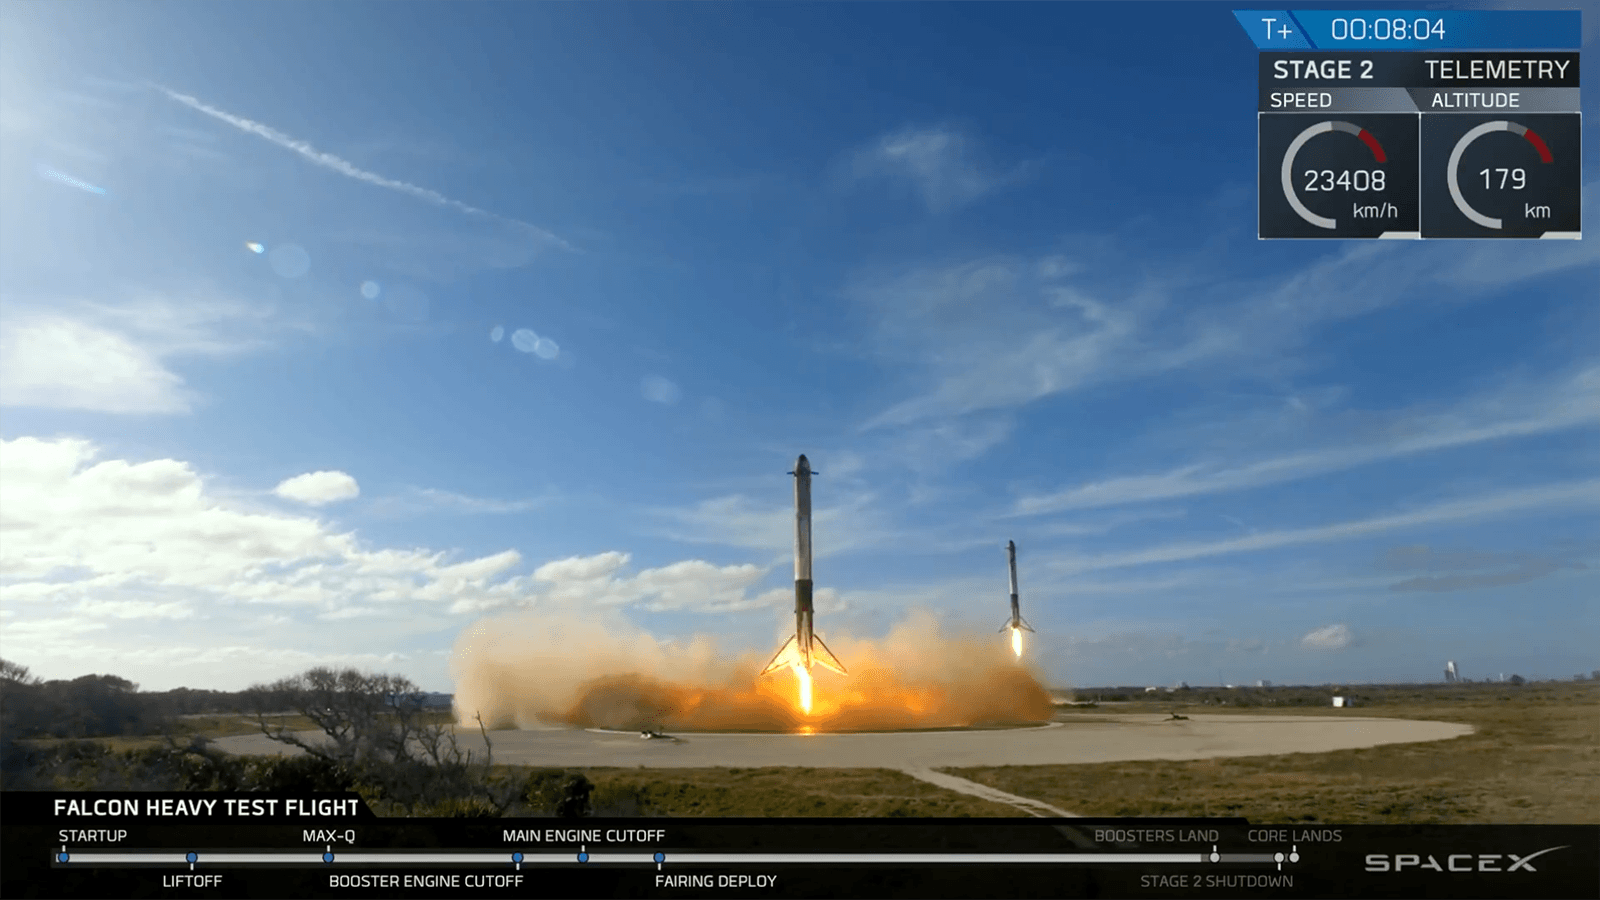 Photos: SpaceX's Falcon Heavy rocket launches with Elon Musk's Tesla